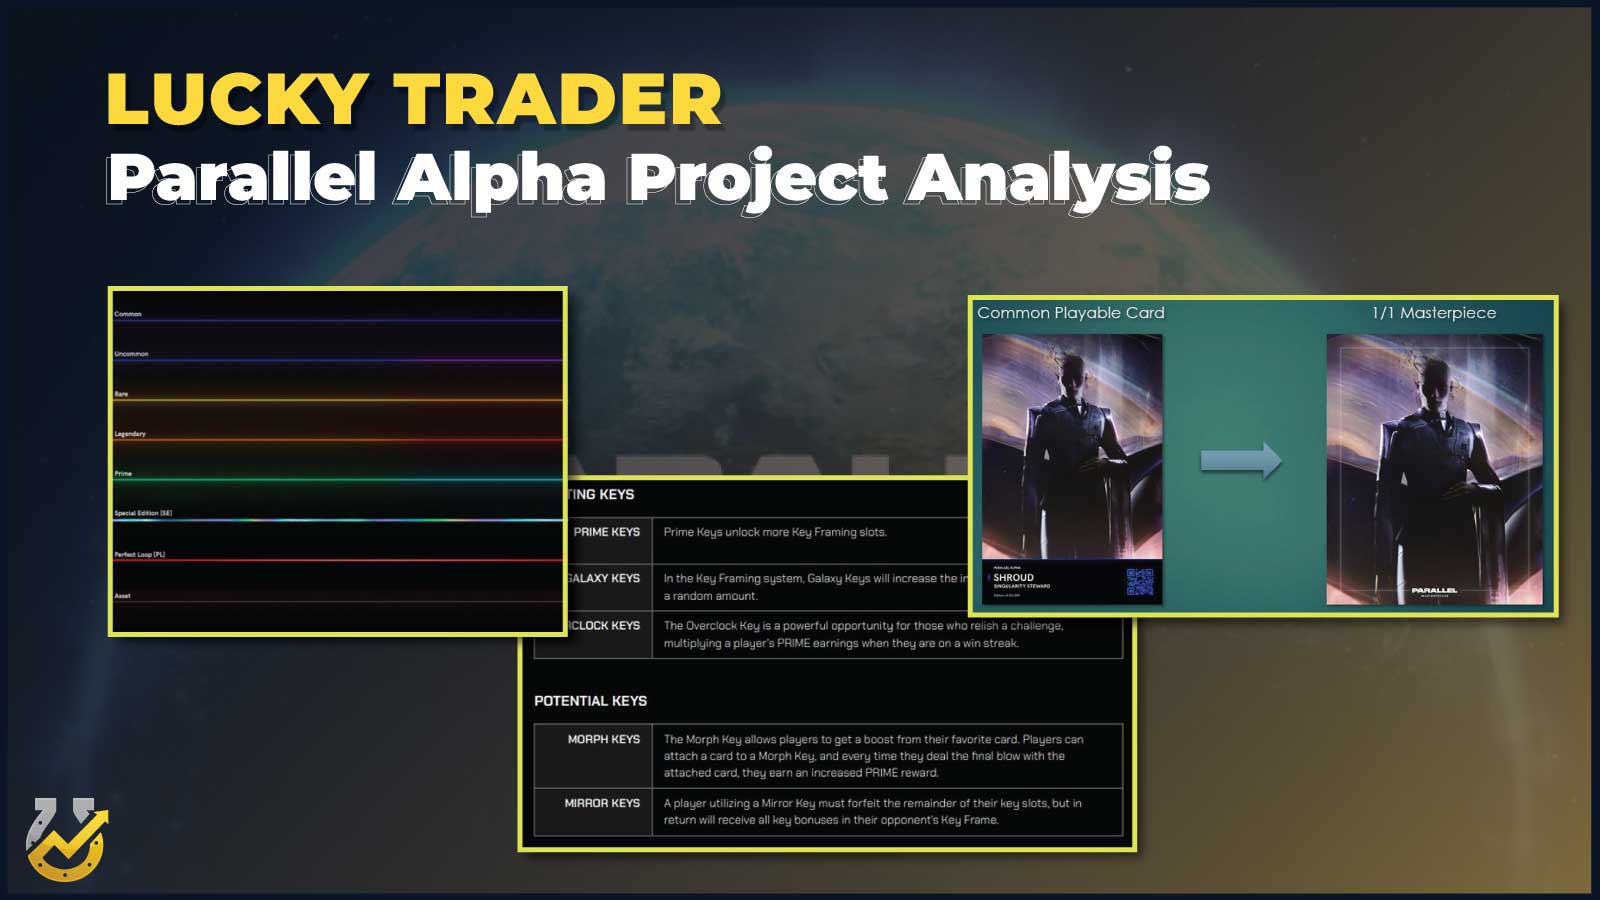 Parallel Alpha Project Analysis